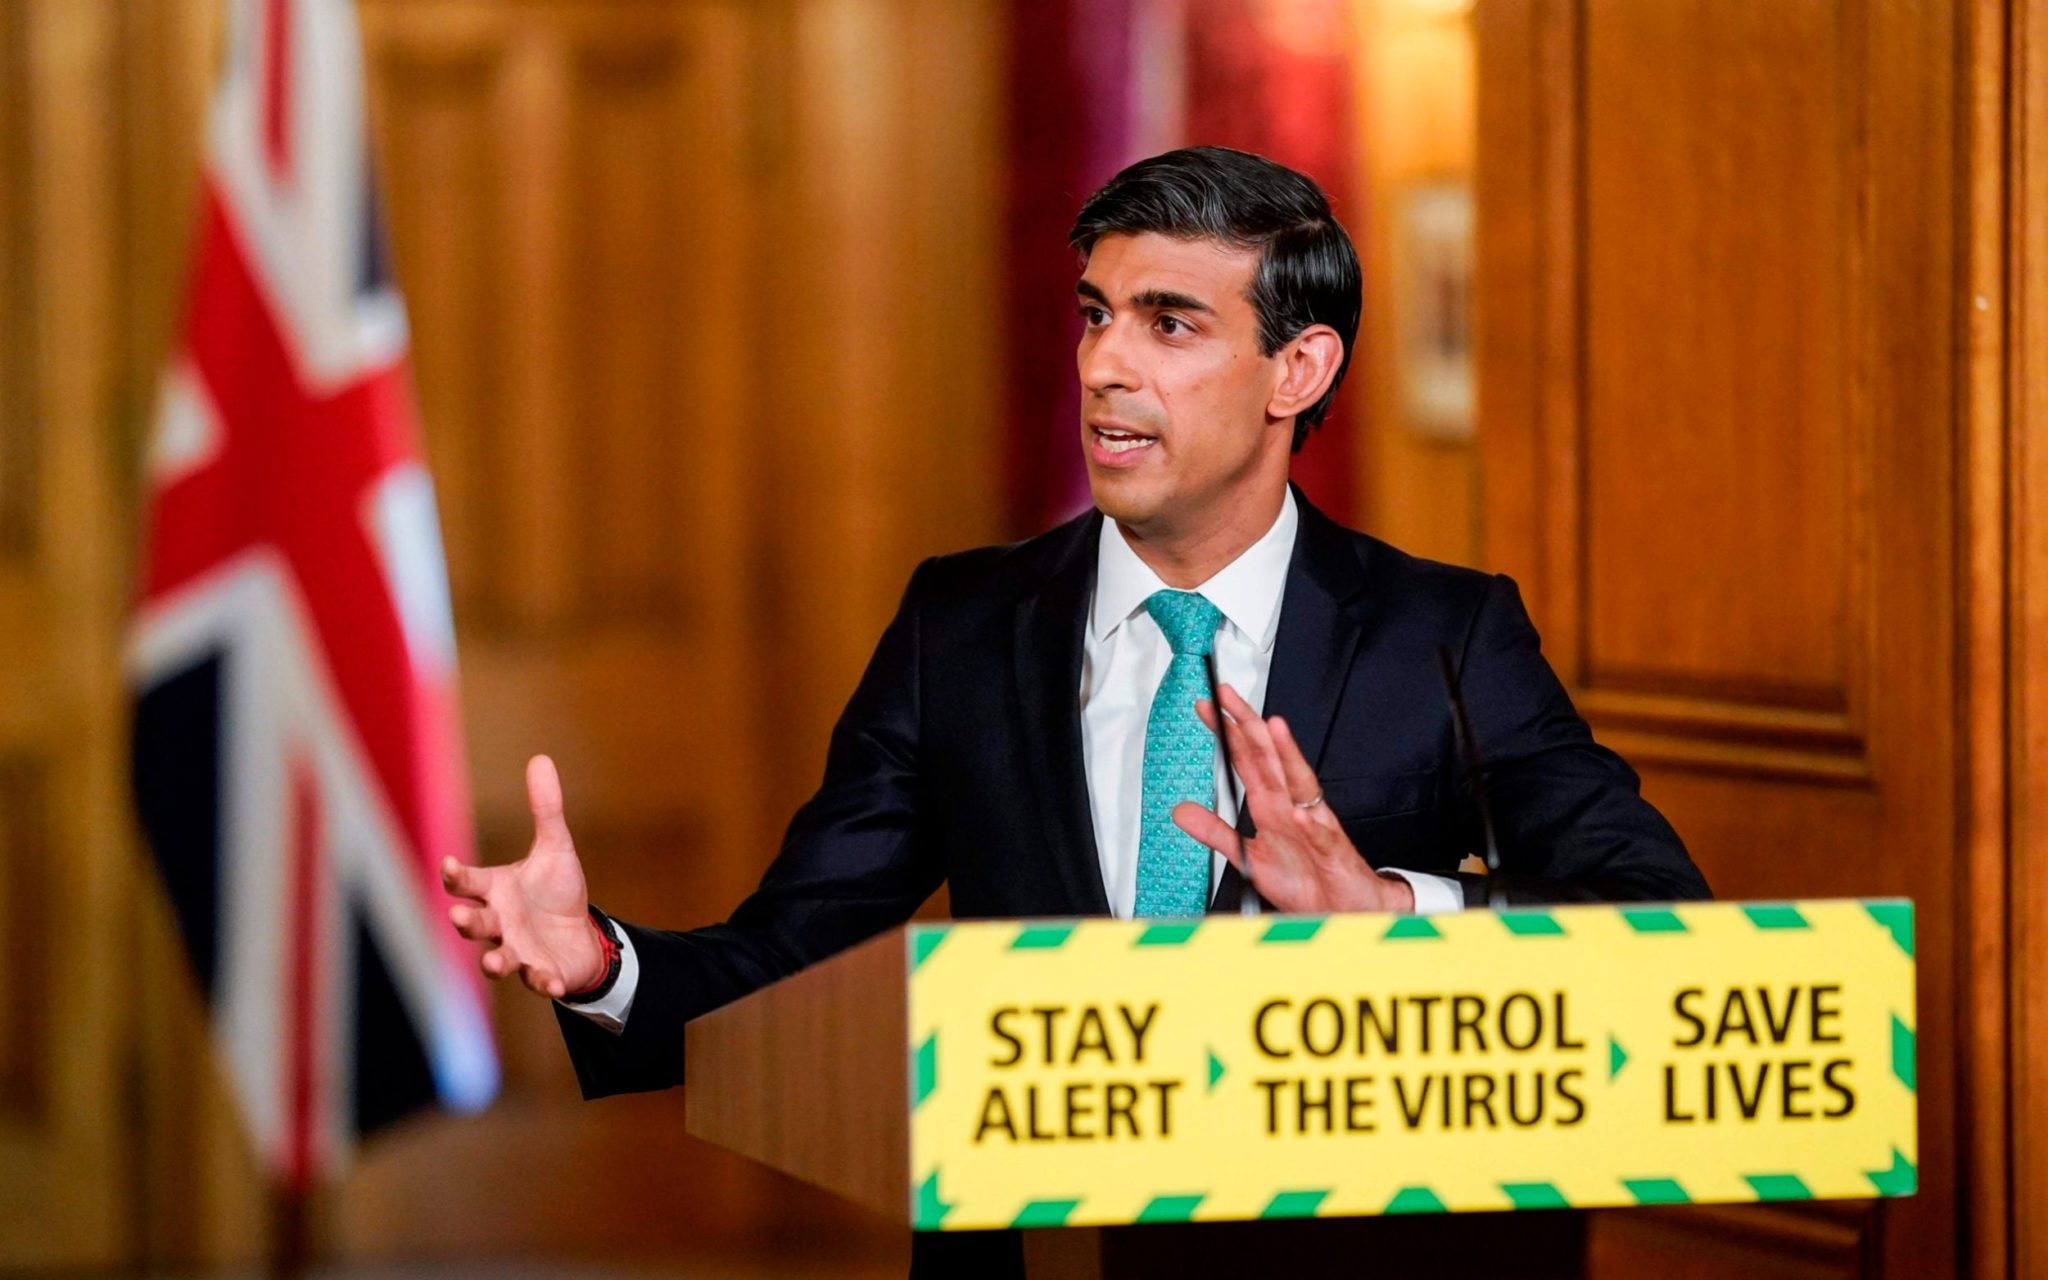 stay-alert-control-the-virus-save-lives